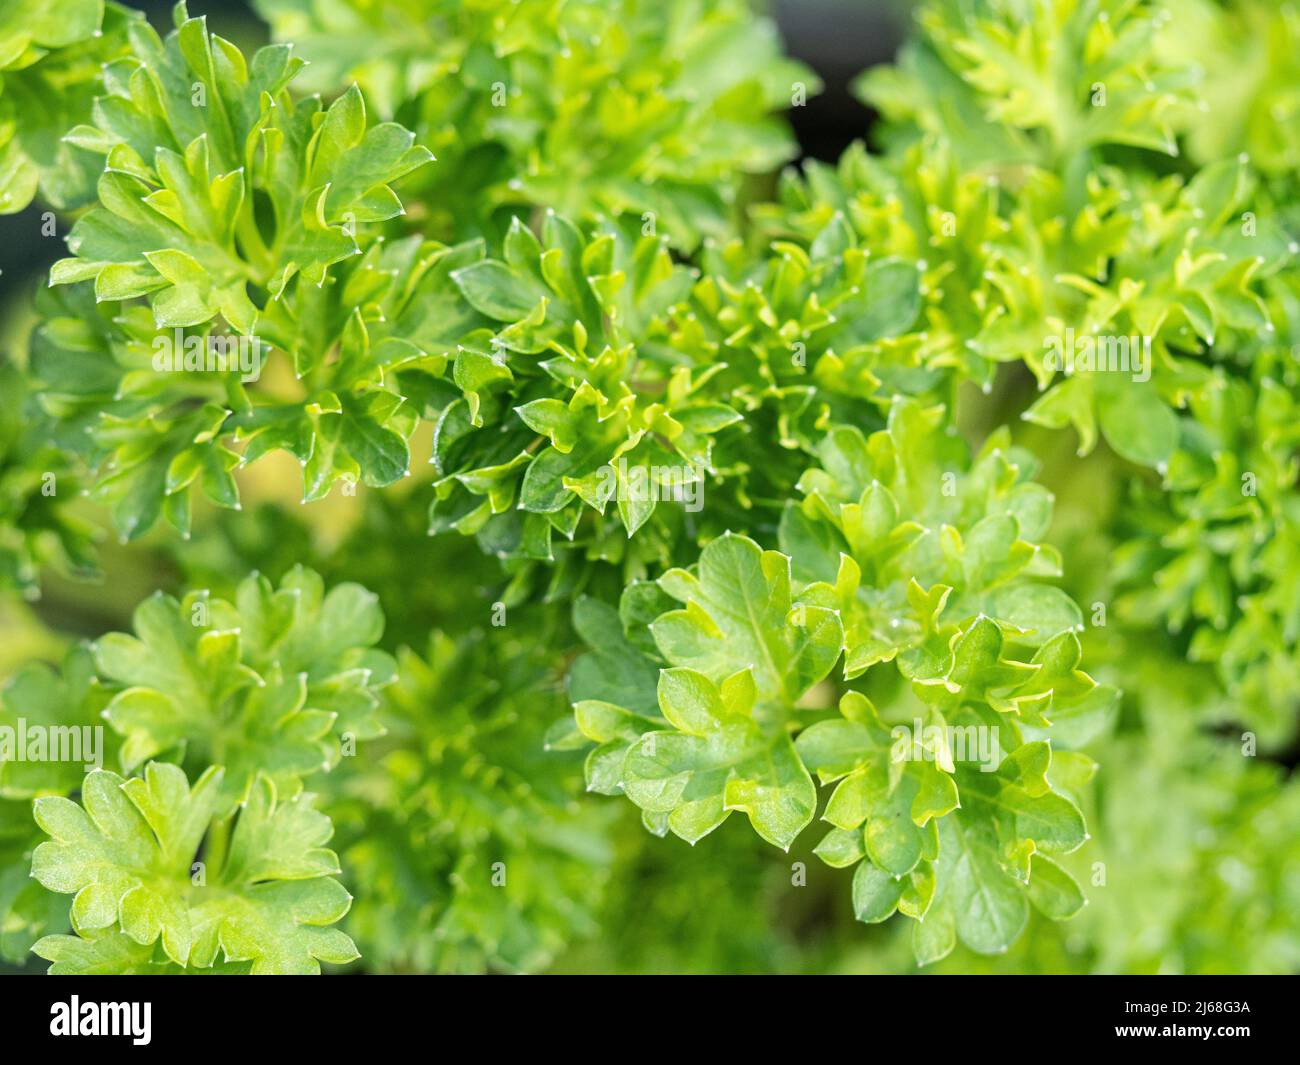 A close up of the bright green green curled leaves of the herb curly parsley Stock Photo